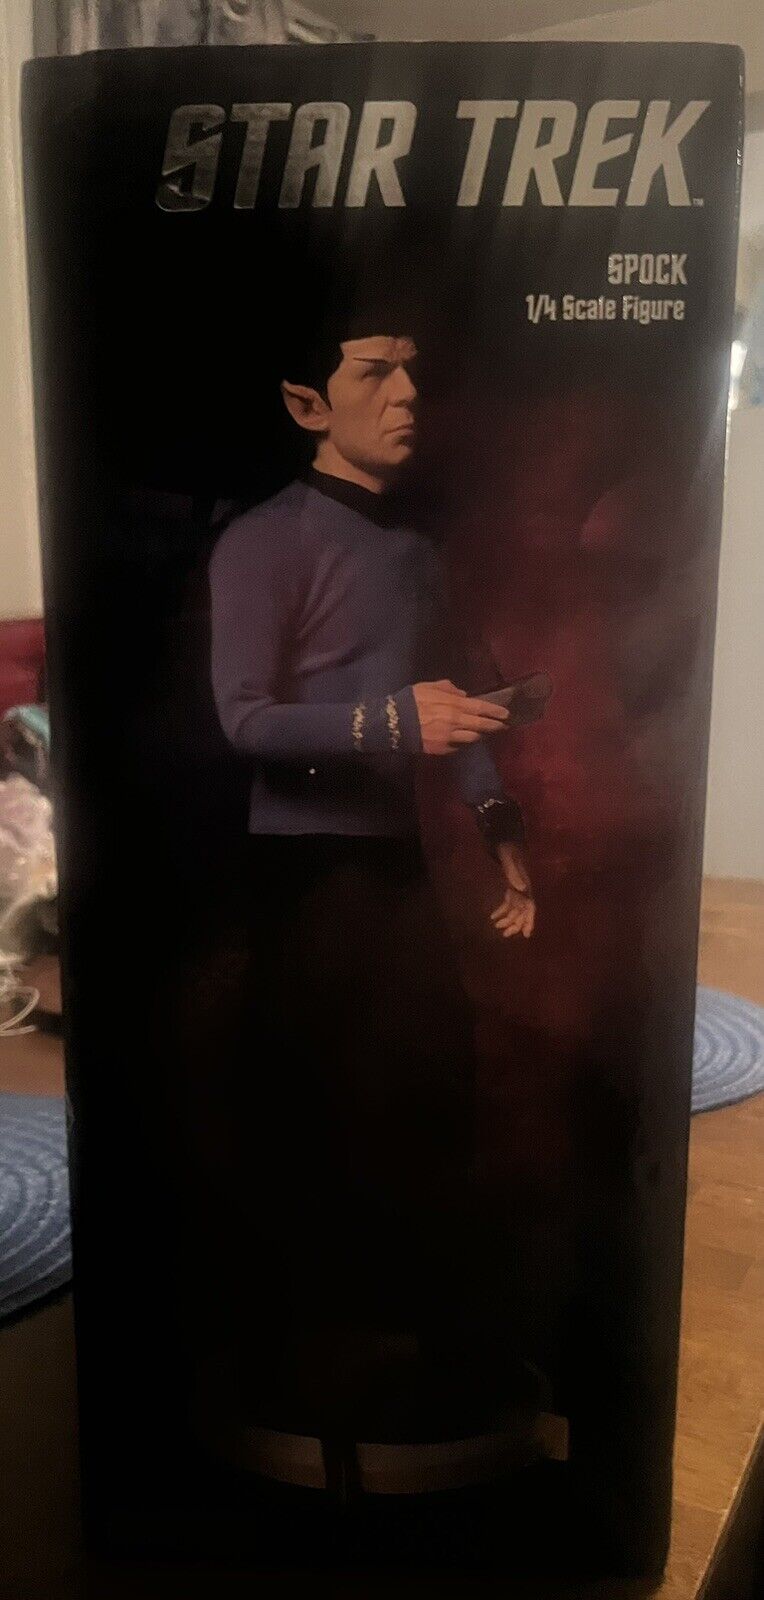 Sideshow Star Trek Spock Figure 1/4 Scale Collectible Statue LE 60/ 1000 New